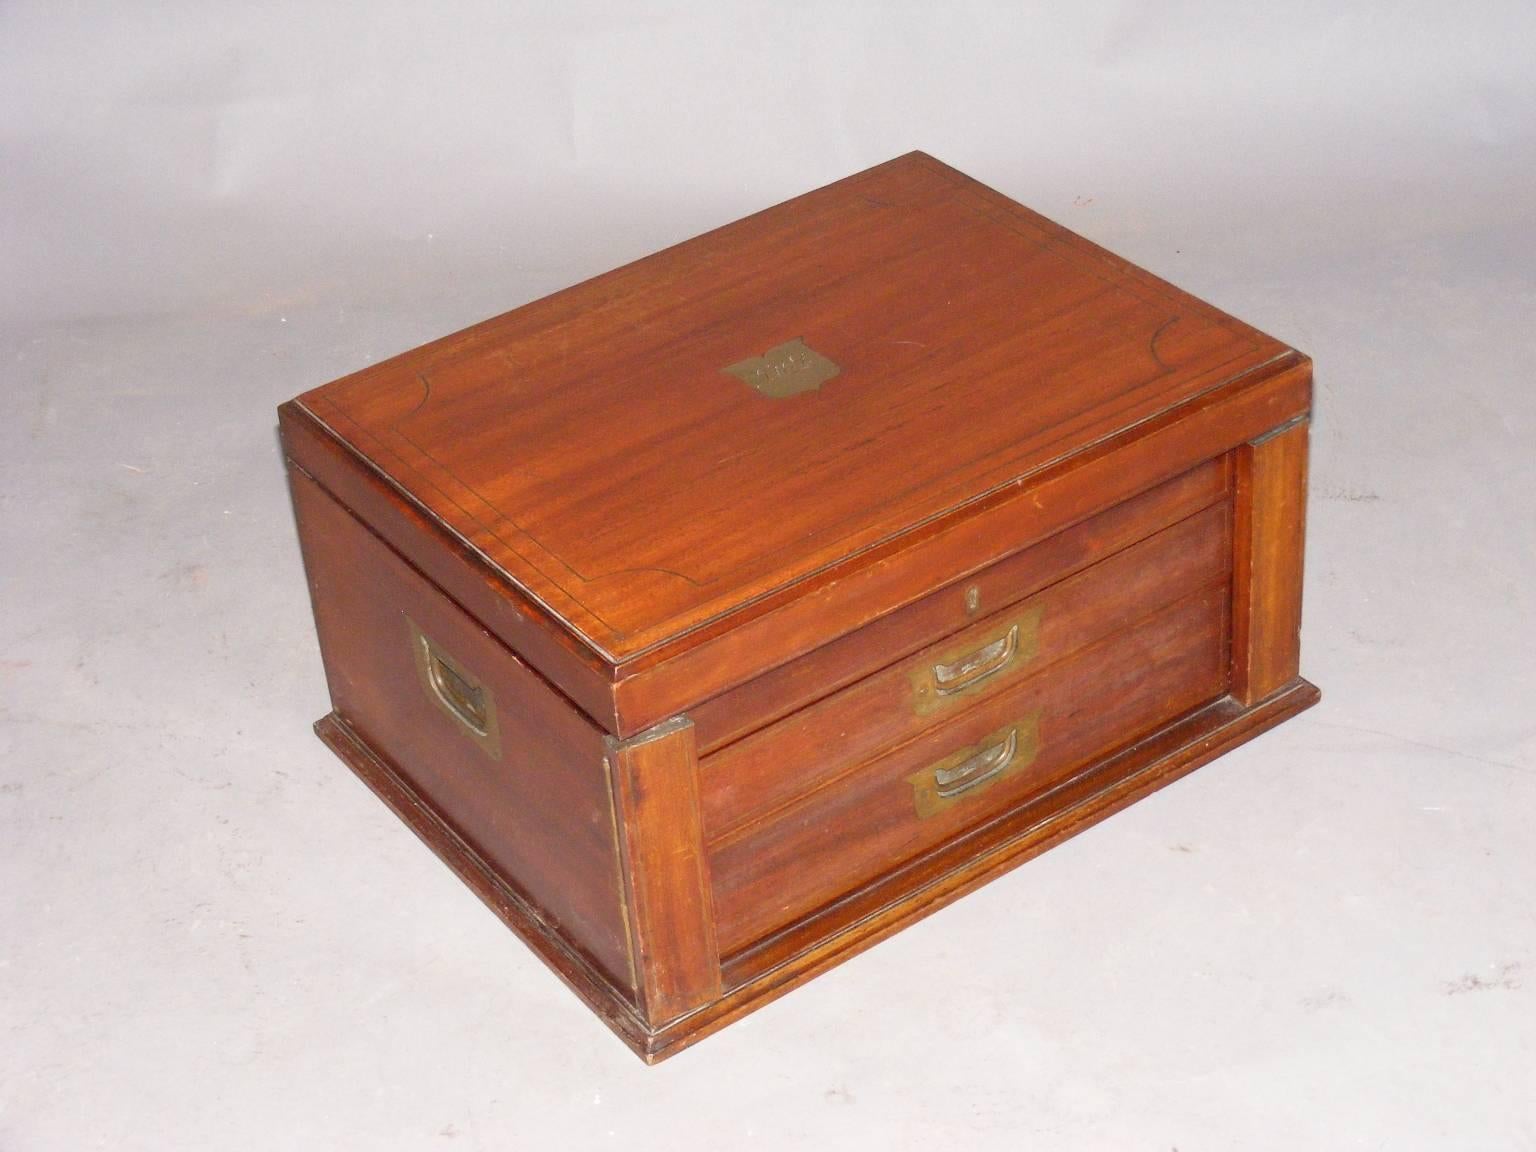 This is an exceptionally fine cabinet box with brass stringing to the hinged lid that opens to reveal a well with green baize lined trays. There are two drawers each with brass countersunk handles. The drawers contain removable lined trays and can